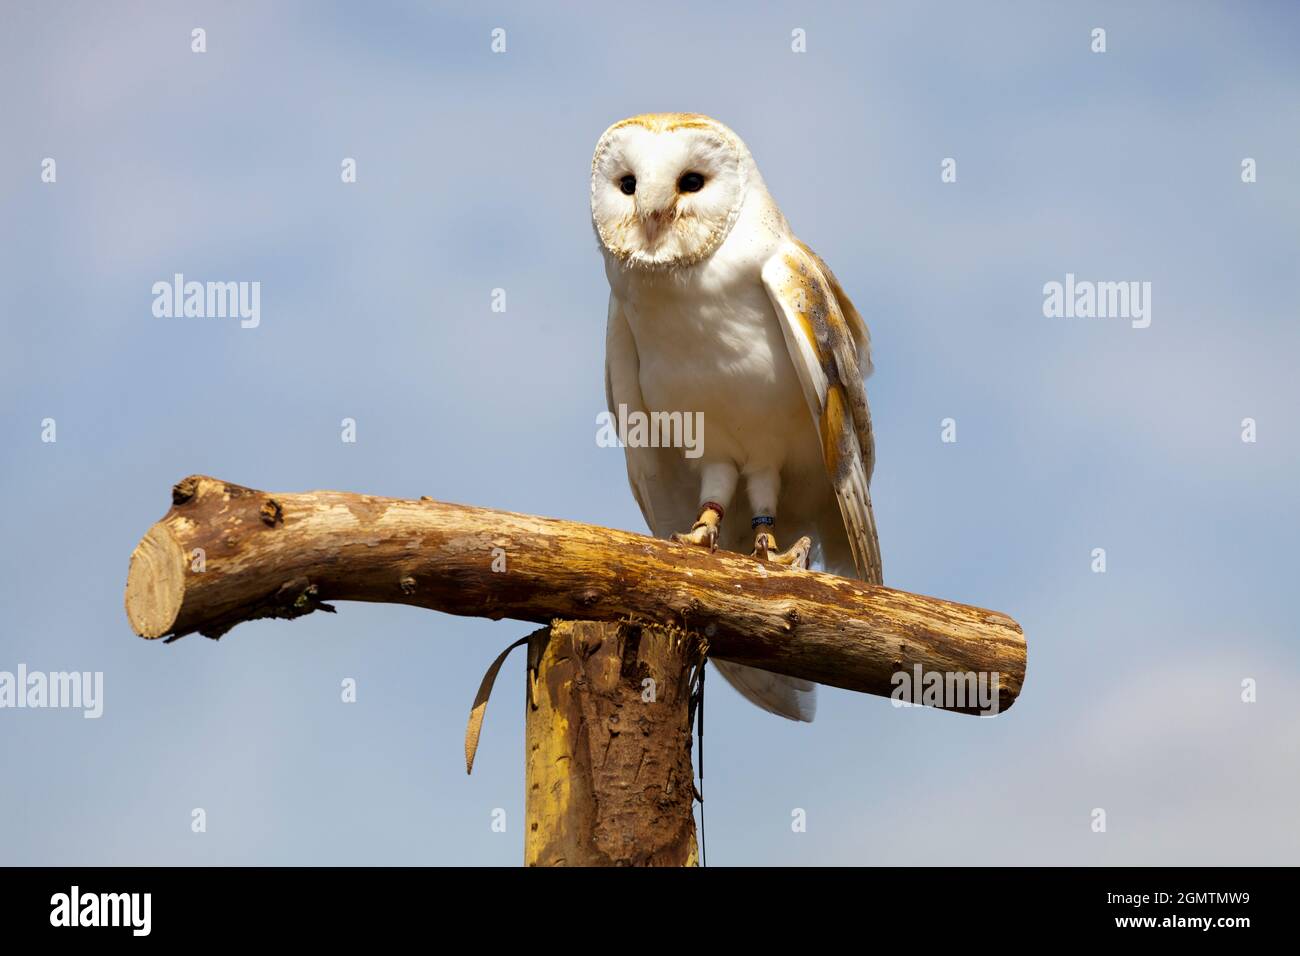 Frilford, Oxfordshire, United Kingdom - 2013; Magnificent raptor seen in an Aviary in Frilford, Oxfordshire. This beautiful fellow is a Barn Owl, Tyto Stock Photo